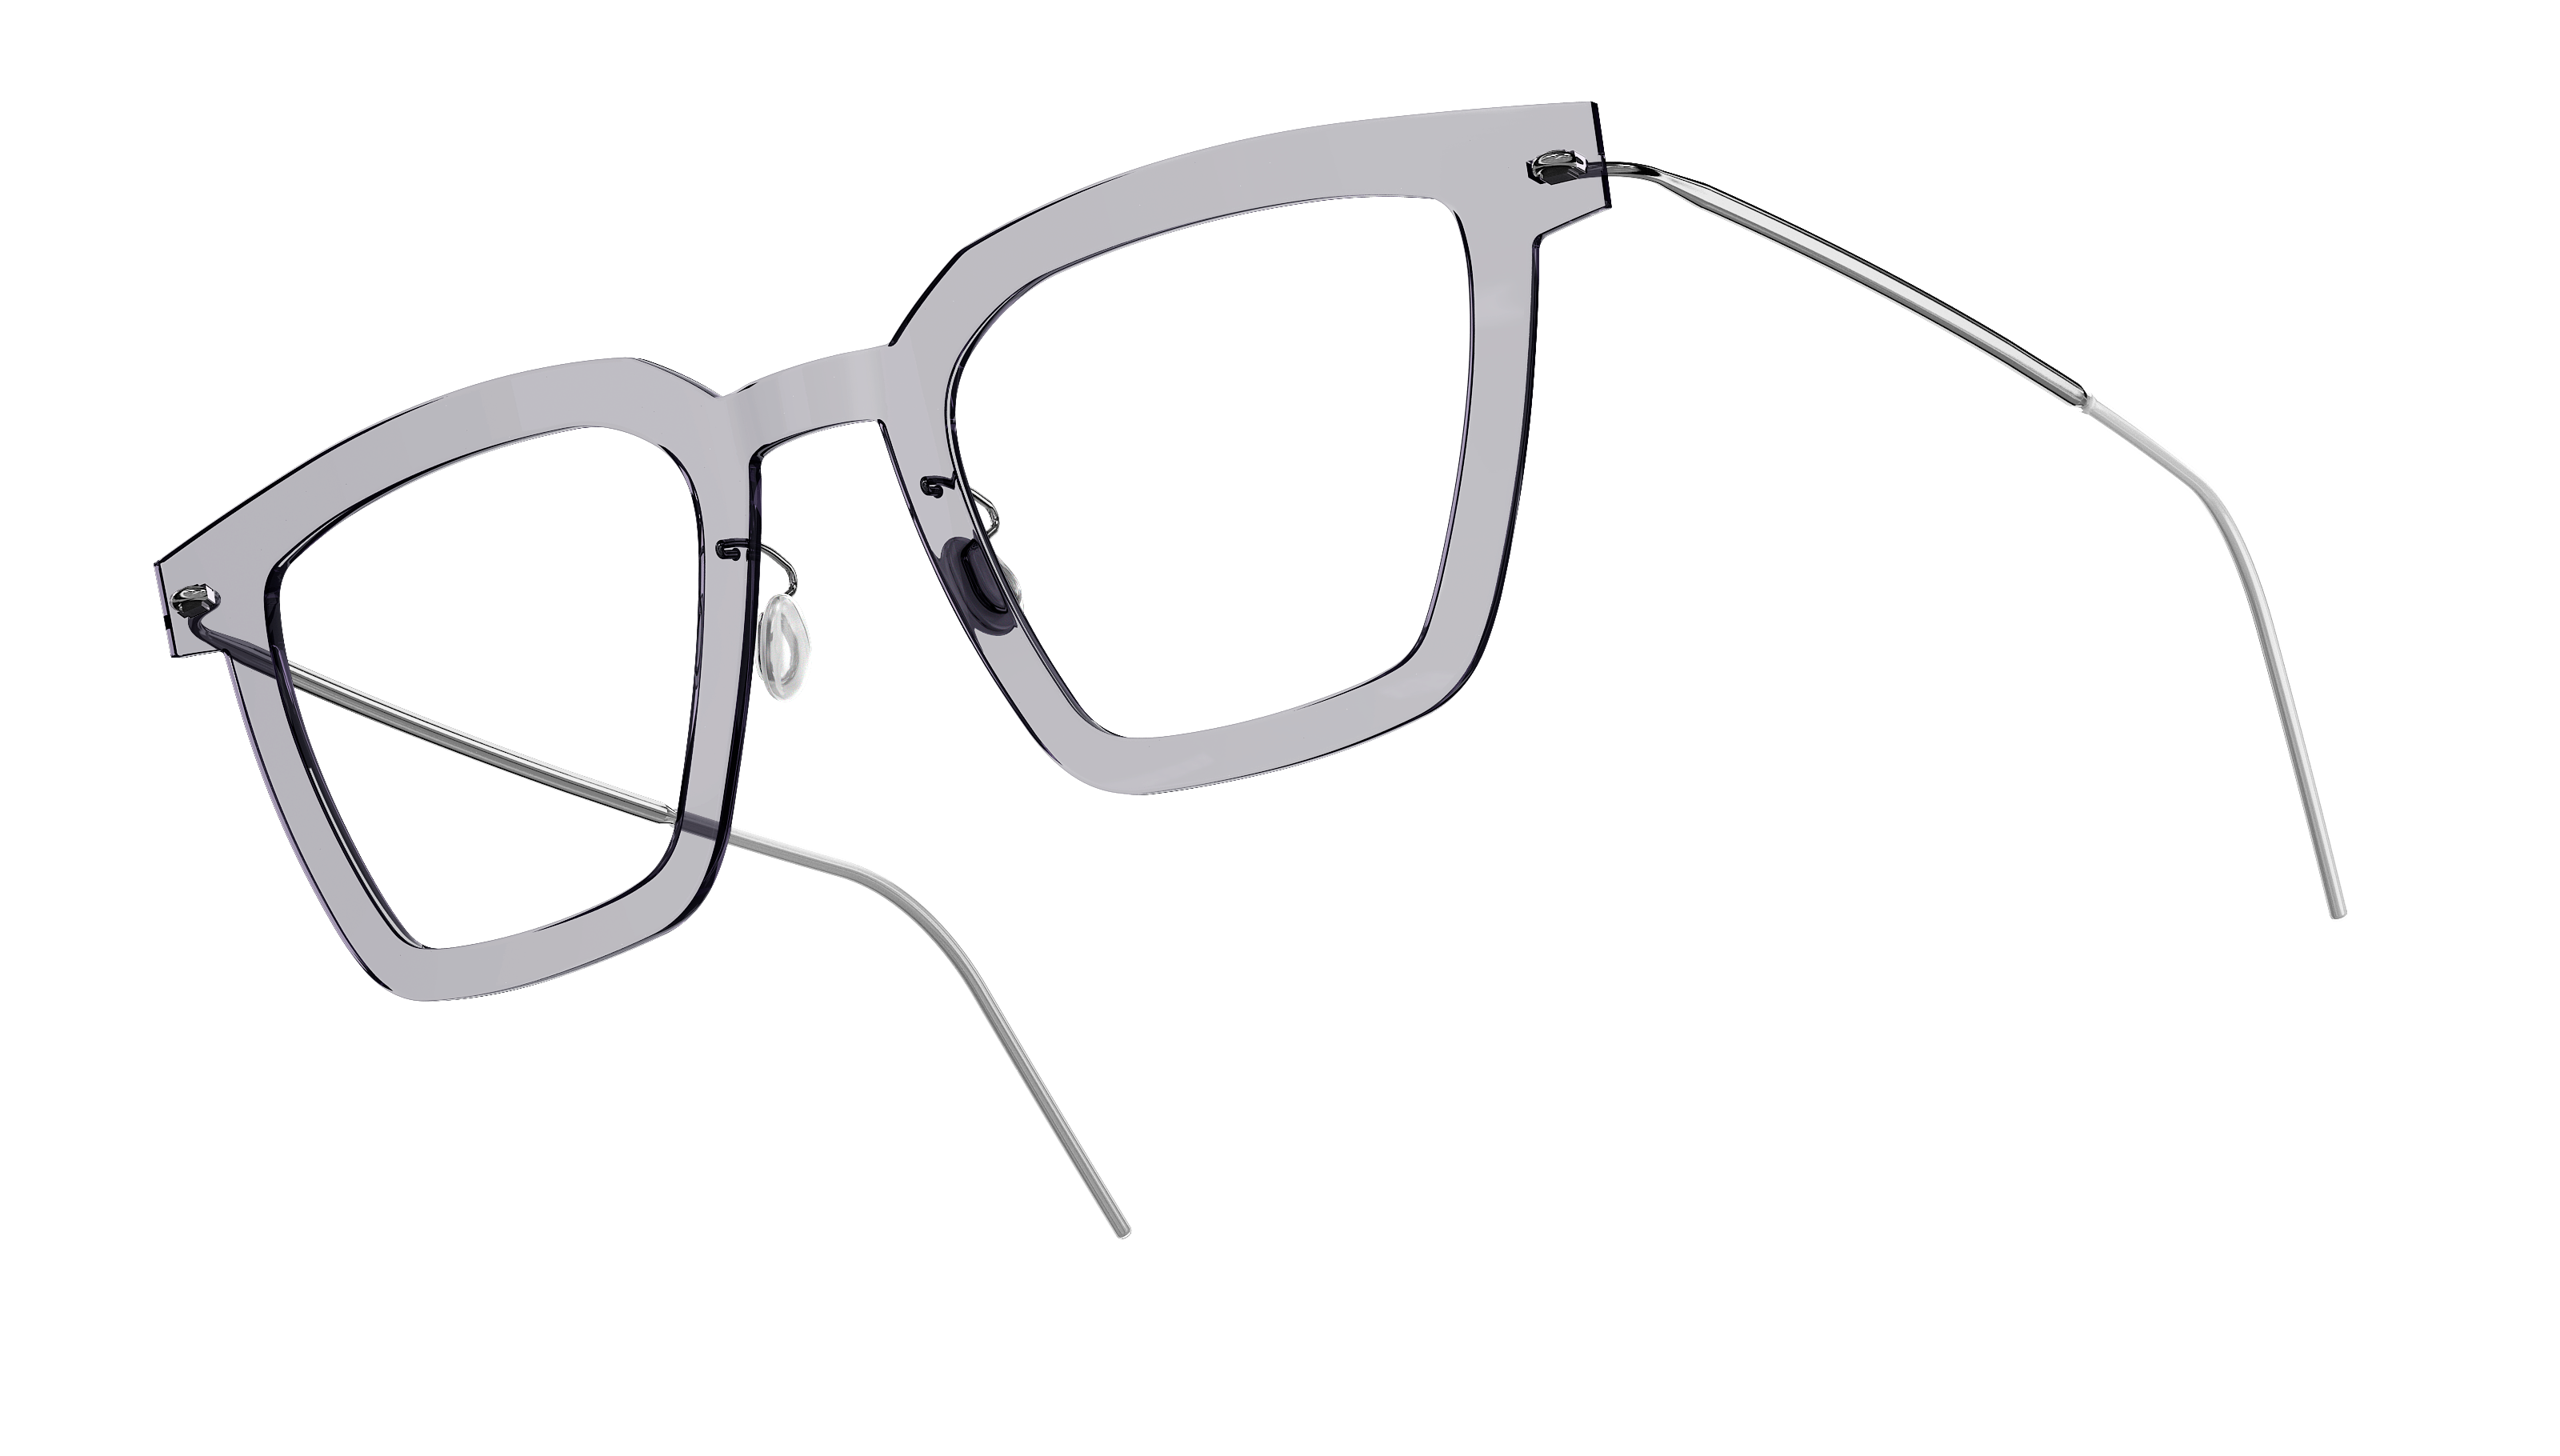 LINDBERG now titanium C07 clear frame in Model 6585 with P10 silver glasses temples